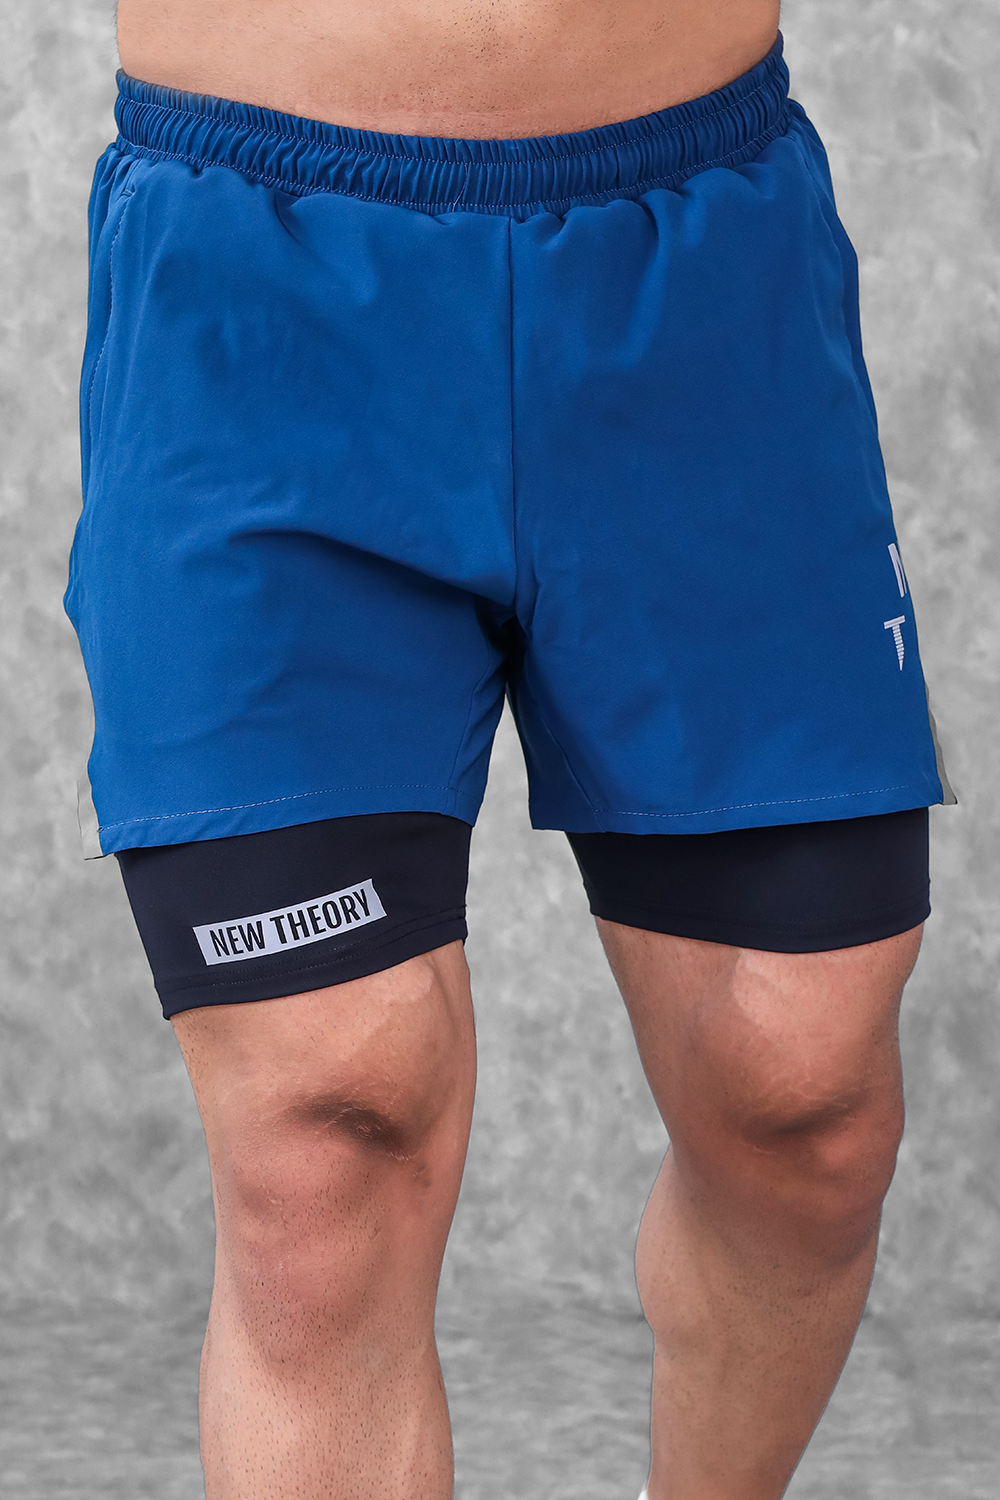 Critical performance Shorts 5 Inch - Teal